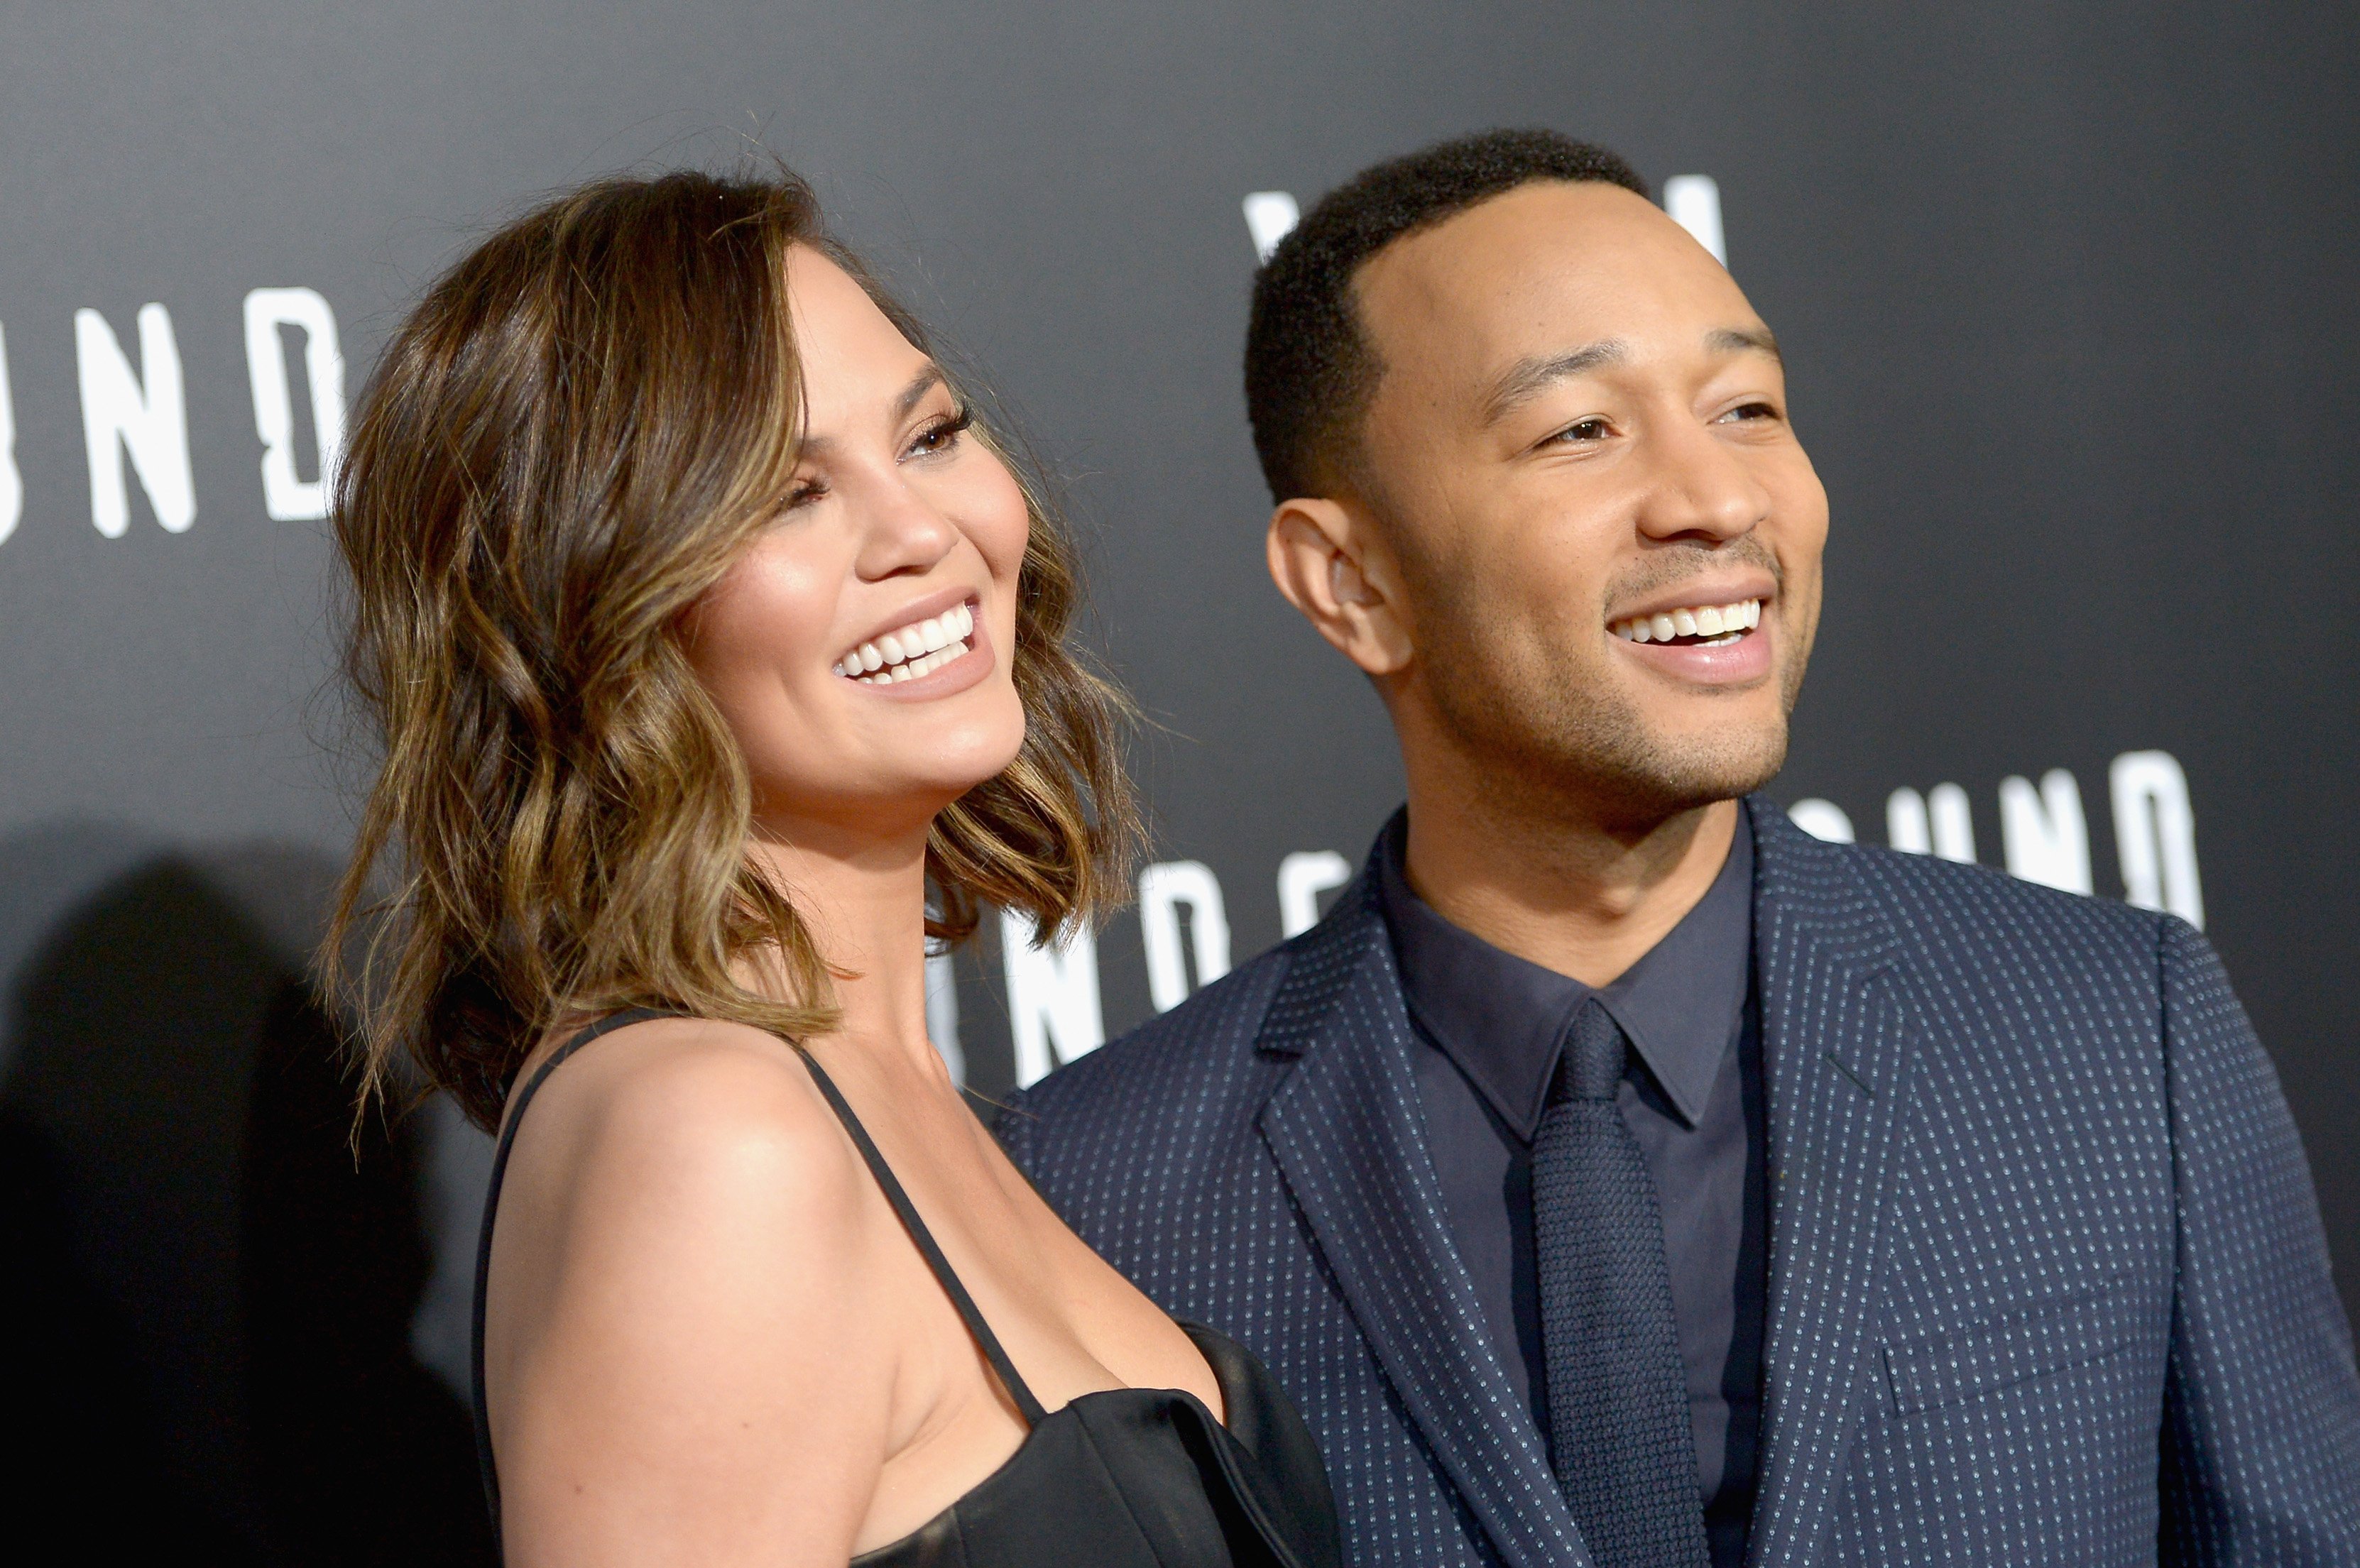 Chrissy Teigen and John Legend pictured at WGN America's "Underground" Season 2 premiere screening, Westwood, California, 2017. | Photo: Getty Images